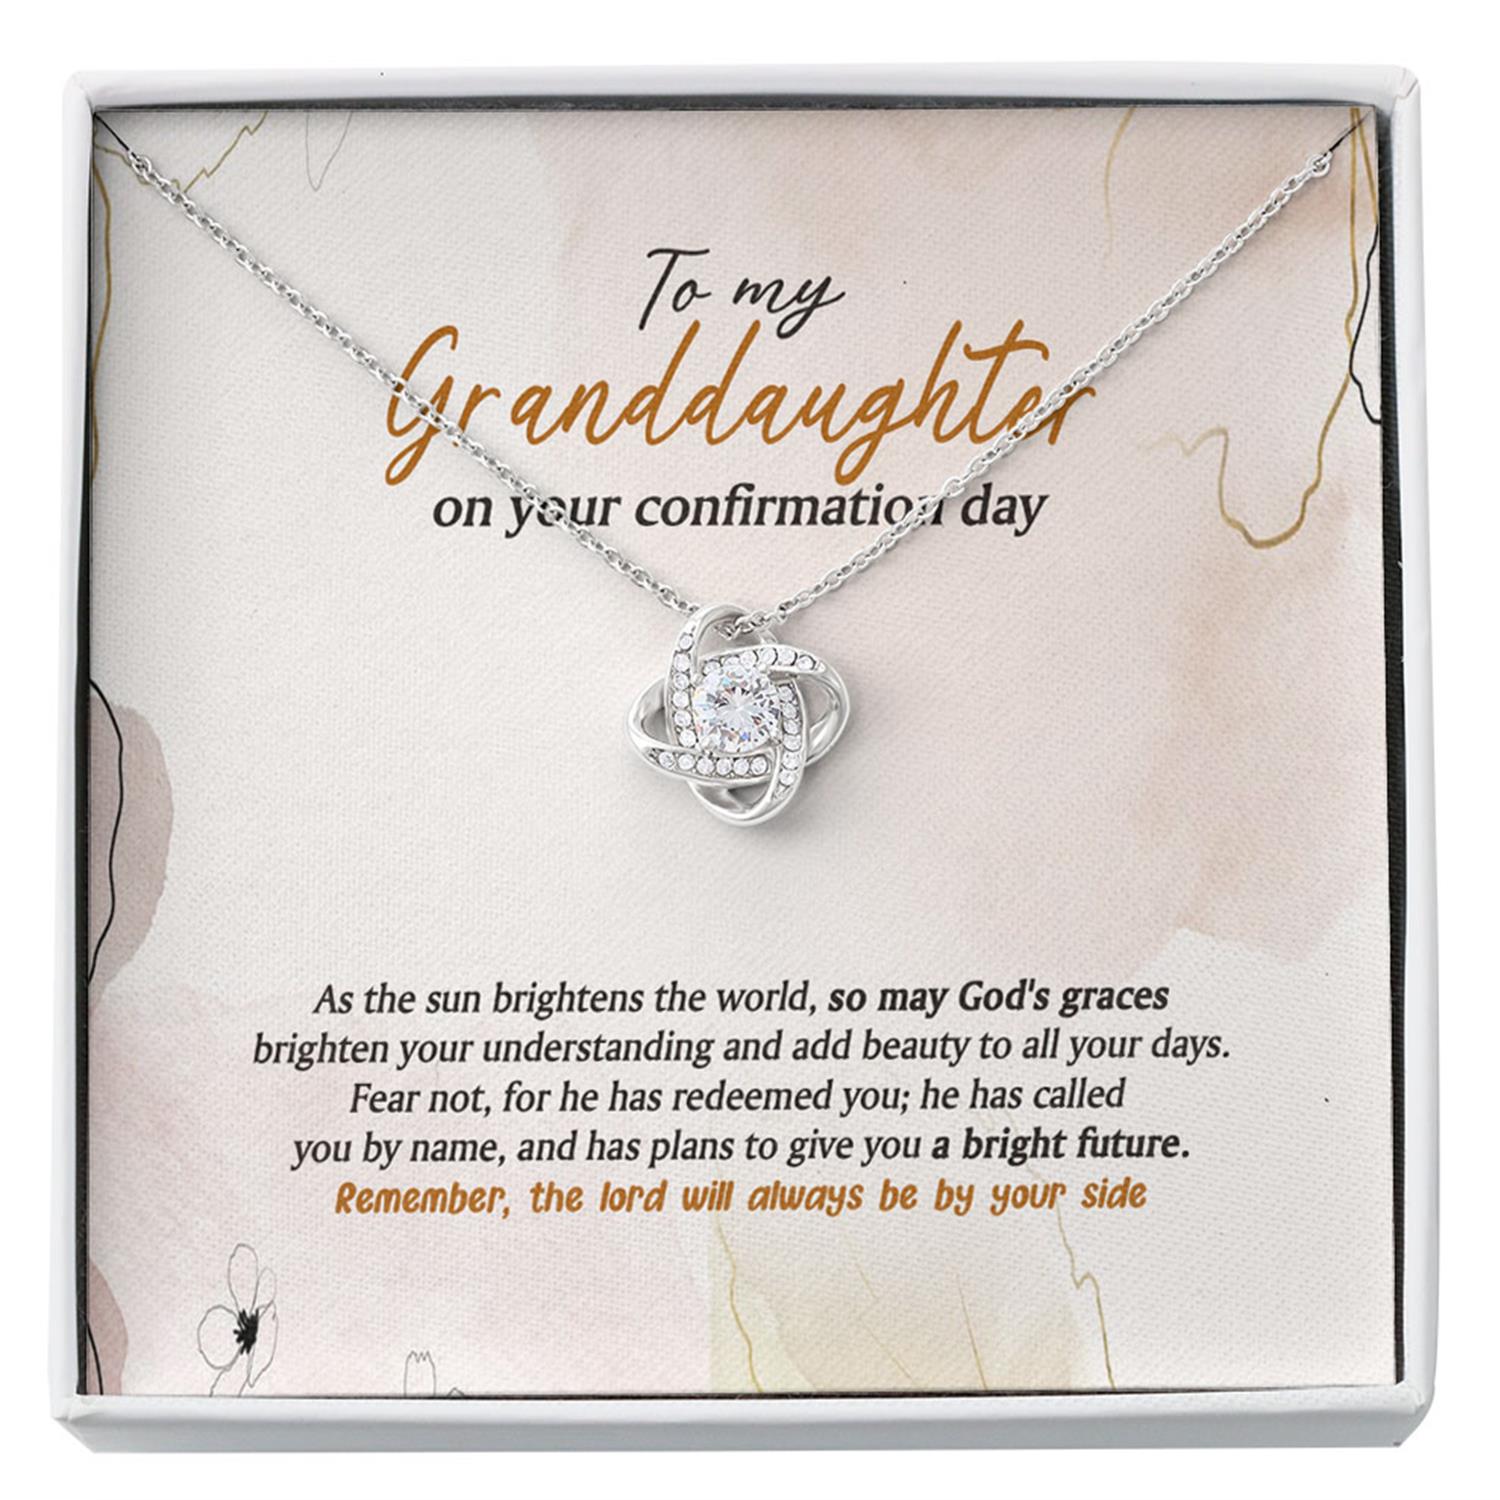 Granddaughter Necklace, To My Granddaughter On Your Confirmation Day Necklace - Baptism, Confirmation Gift Custom Necklace